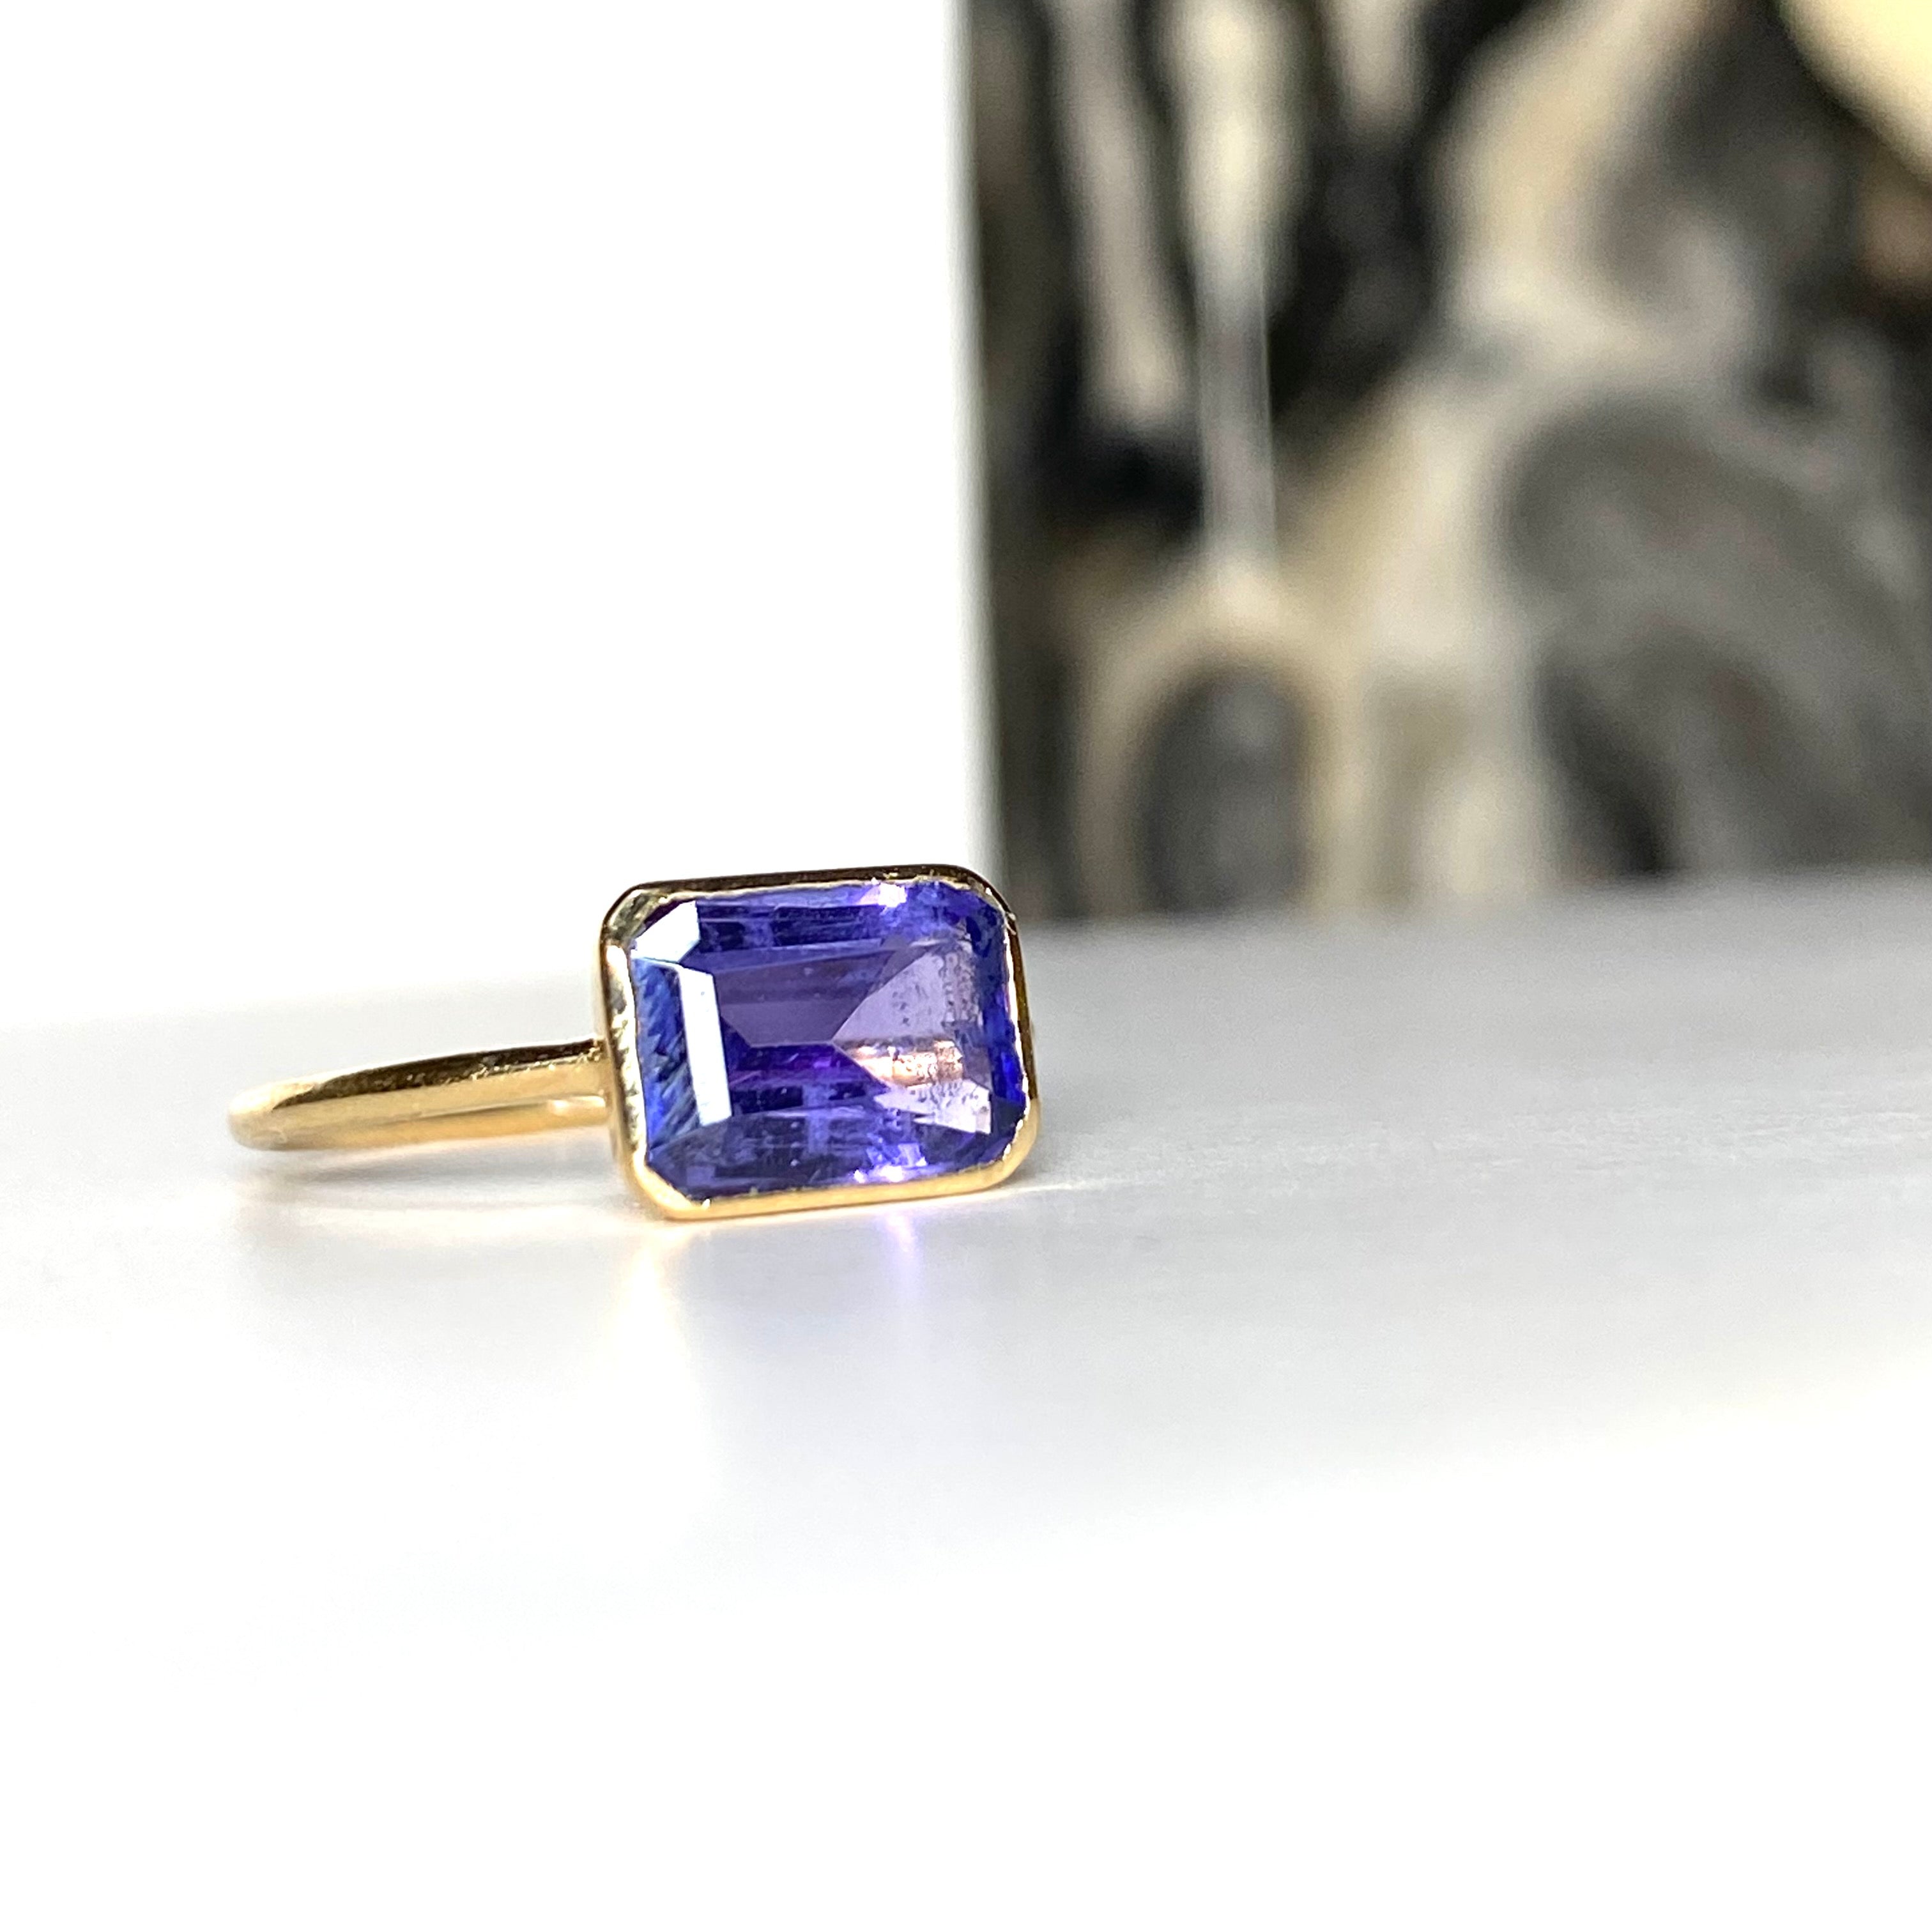 1.4CT Emerald Cut Tanzanite 18K Yellow Gold Solitaire Stacking Ring Size 5